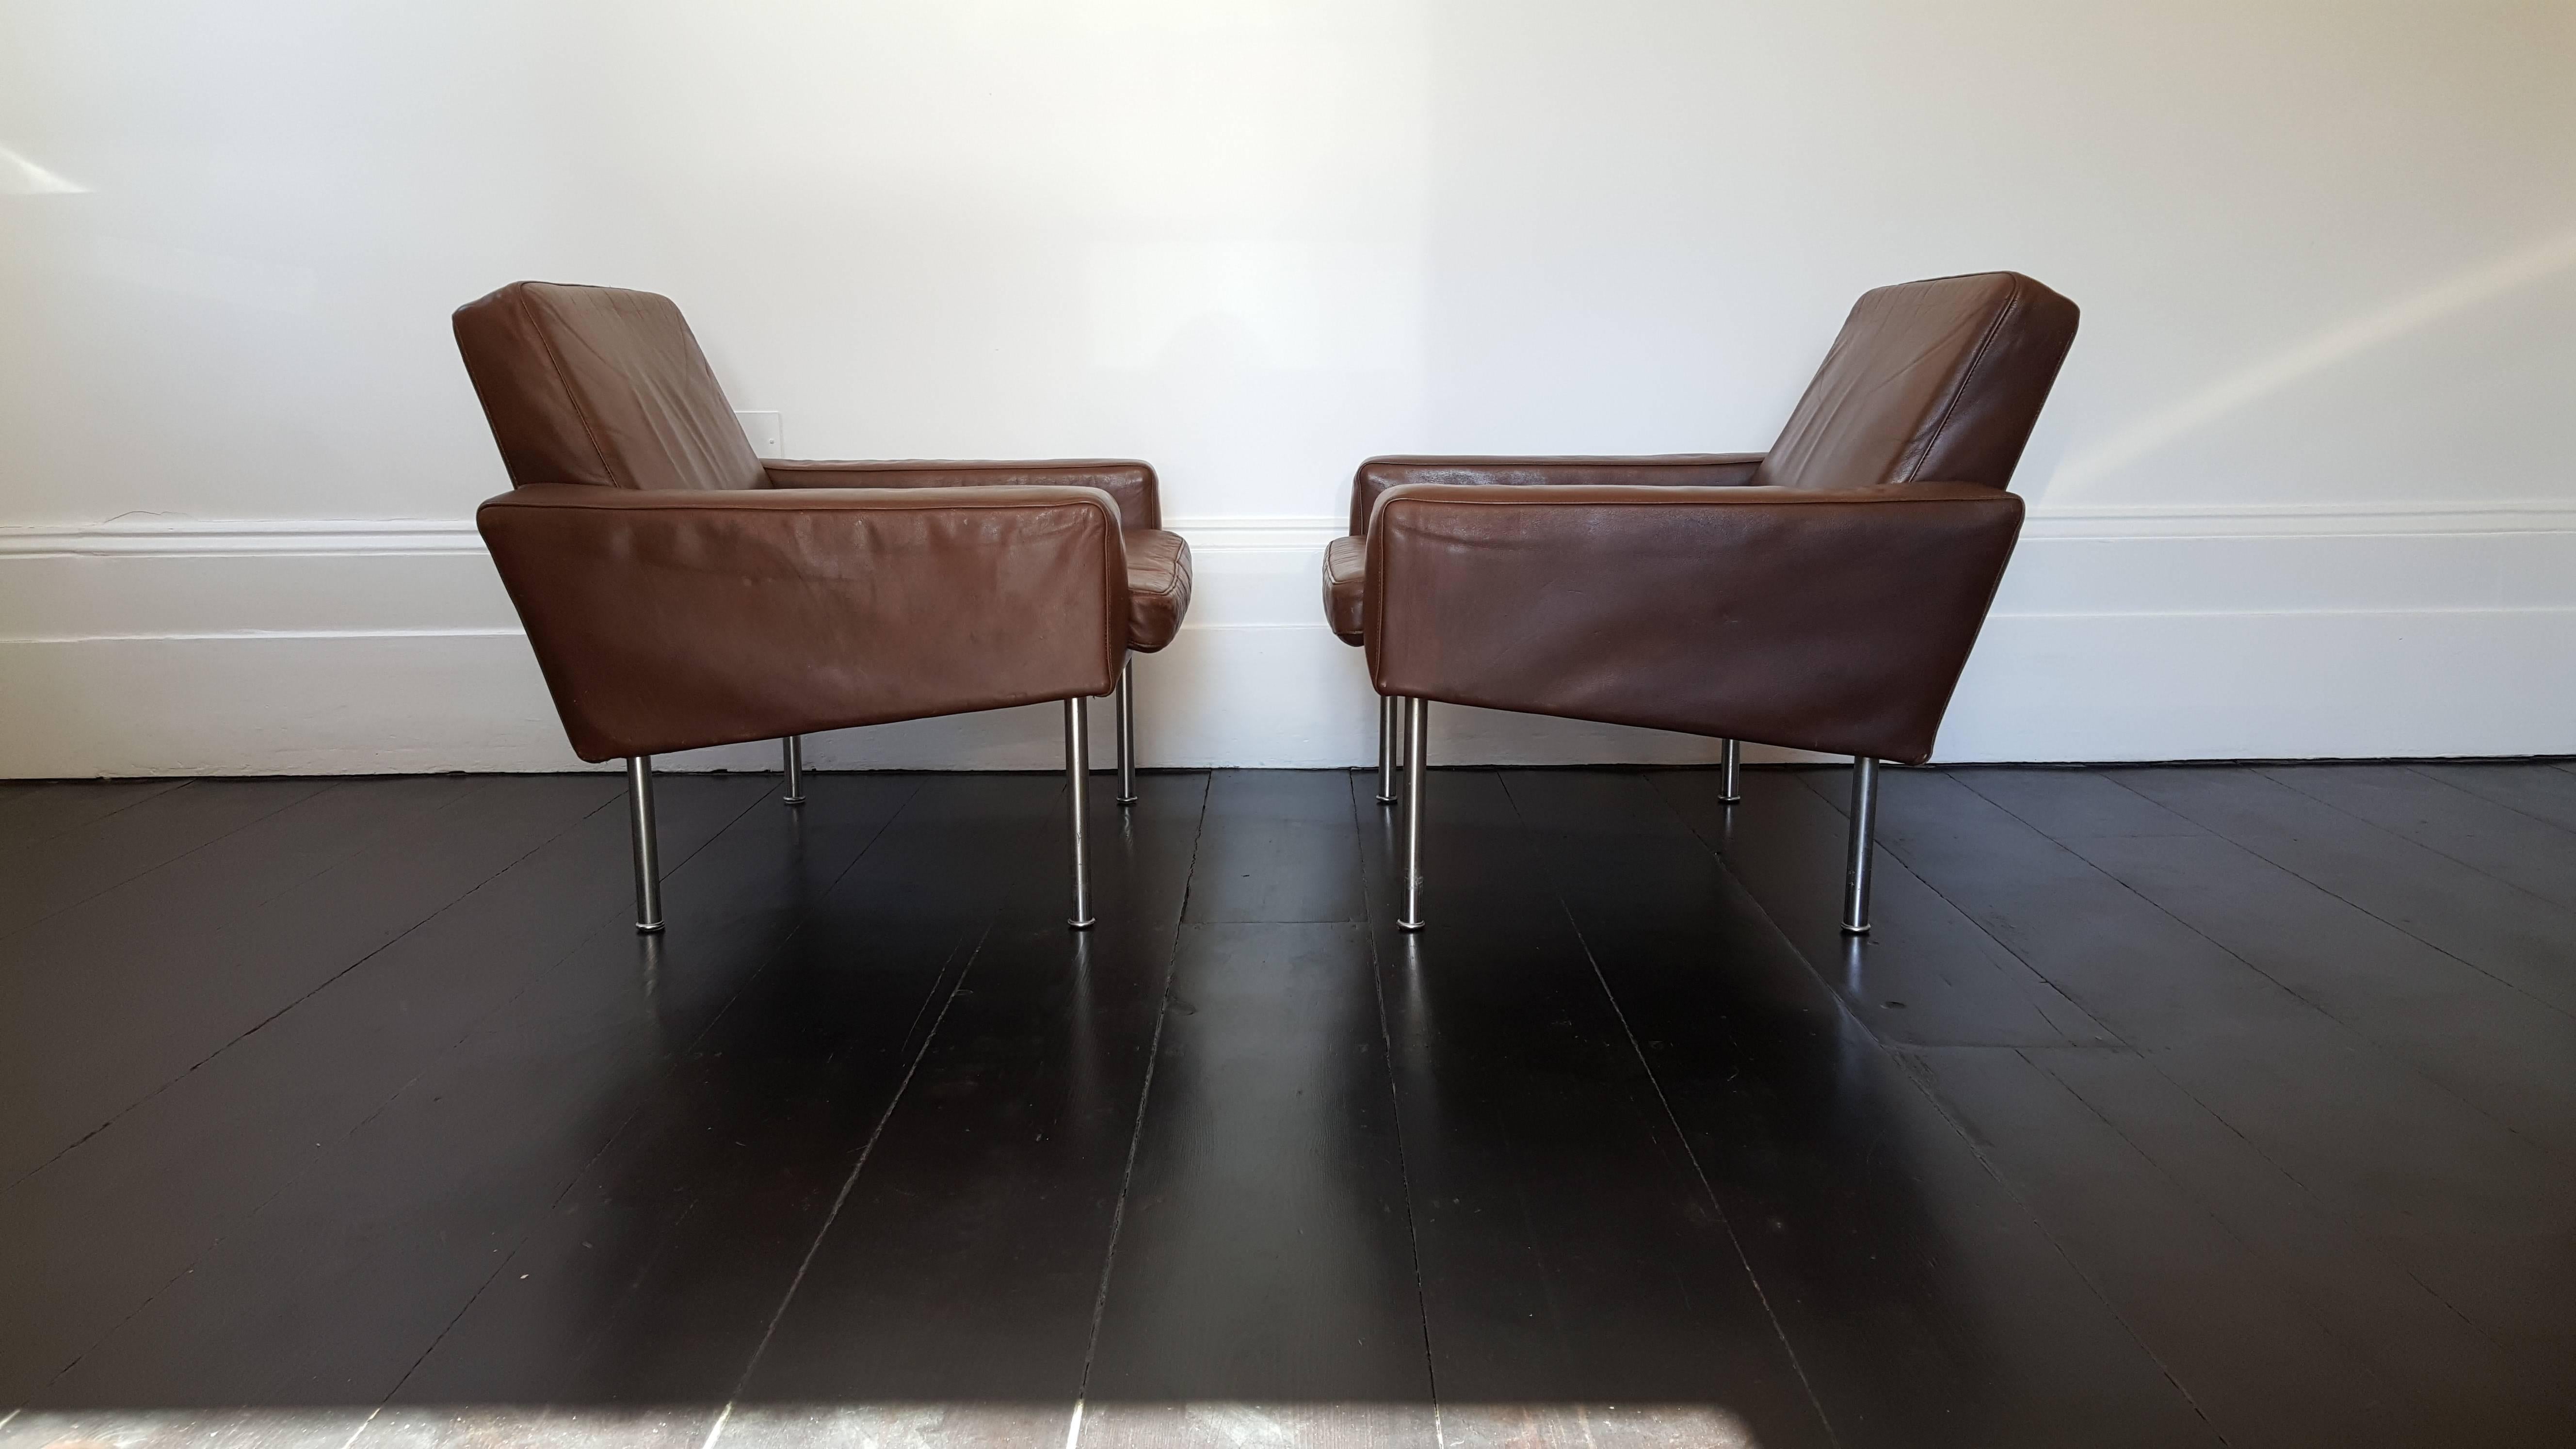 Stunning pair of Hans J. Wegner airport chairs model 34/1 on steel legs. These come with the original leather, hard to find chairs, great looking & comfortable.

Hans J. Wegner was certified as a joiner in 1931. After starting his career as a